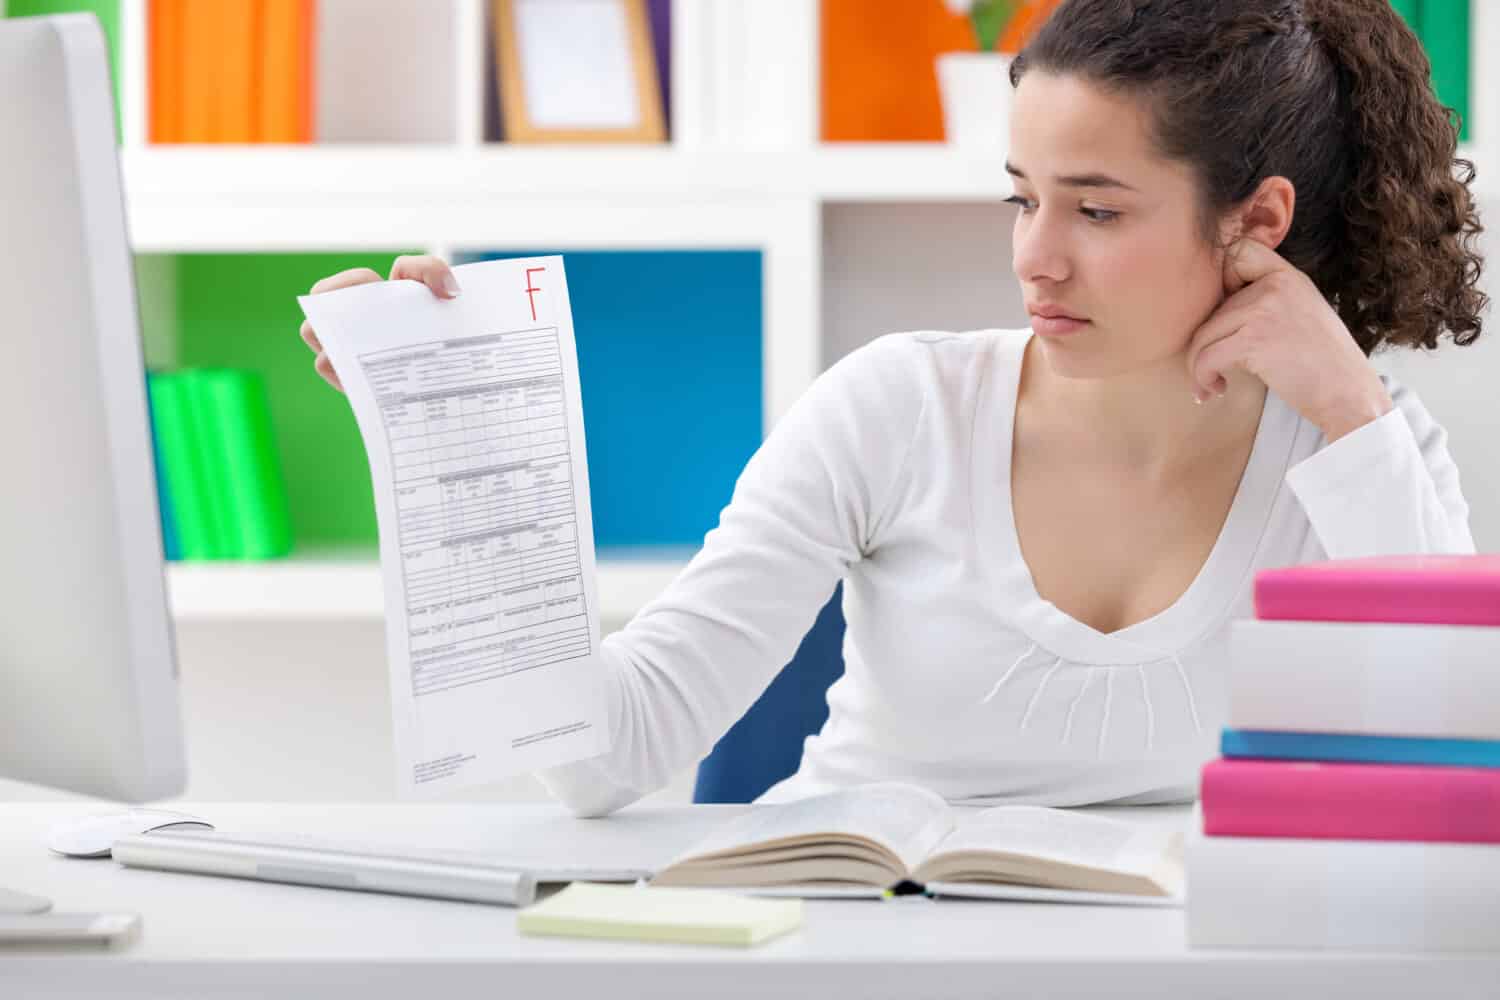 student girl holding a test paper with a failing grade